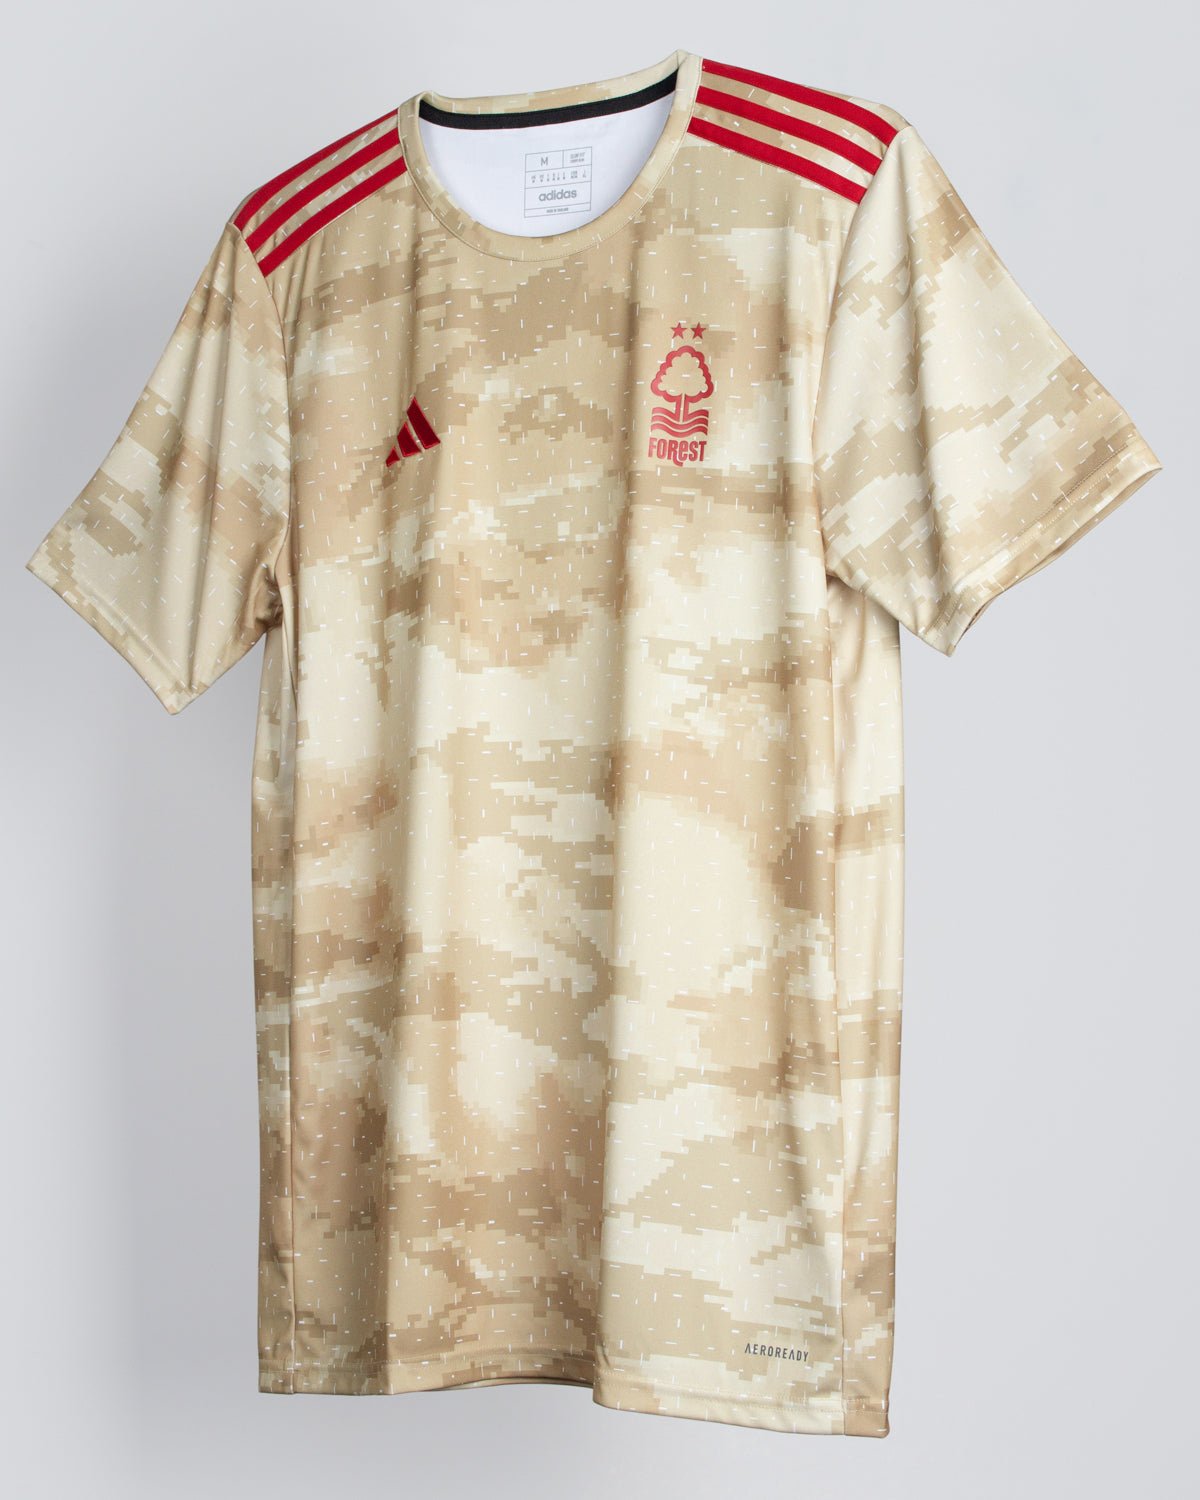 NFFC Limited Edition Warm Up Jersey 23-24 - Nottingham Forest FC